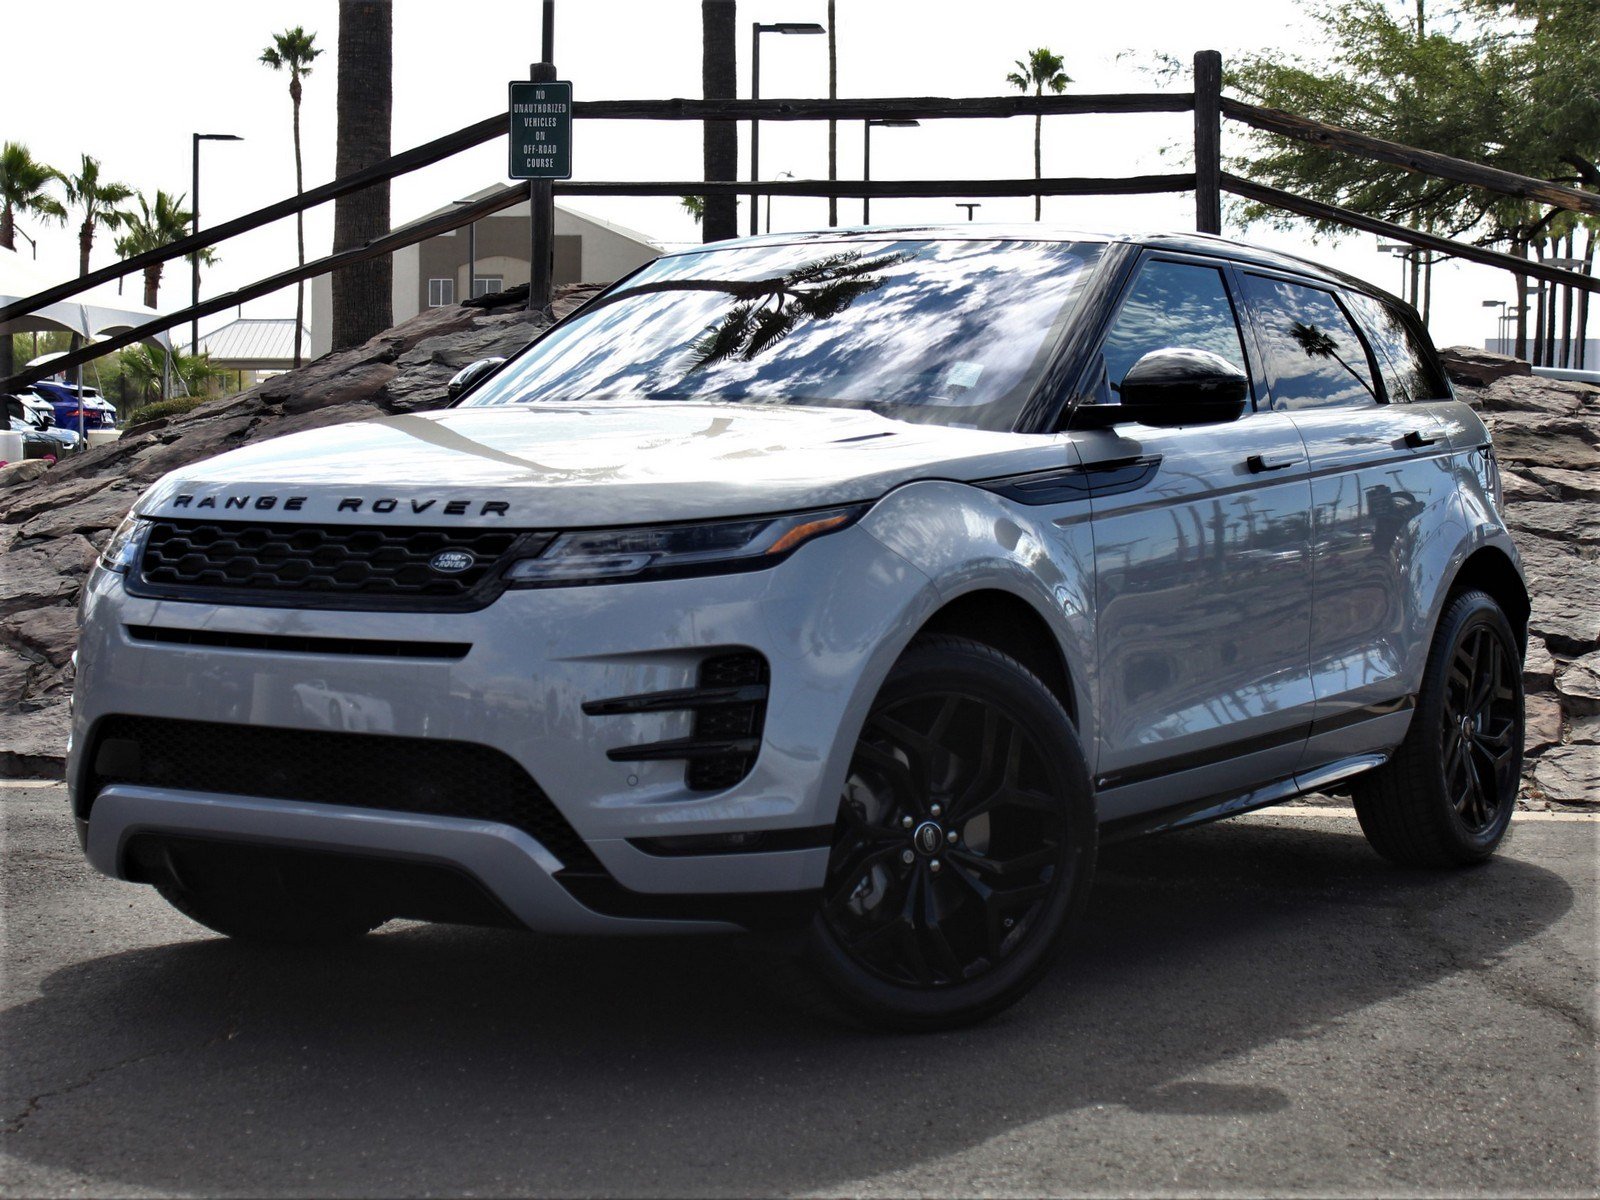 New 2020 Land Rover Range Rover Evoque R Dynamic S With Navigation Awd